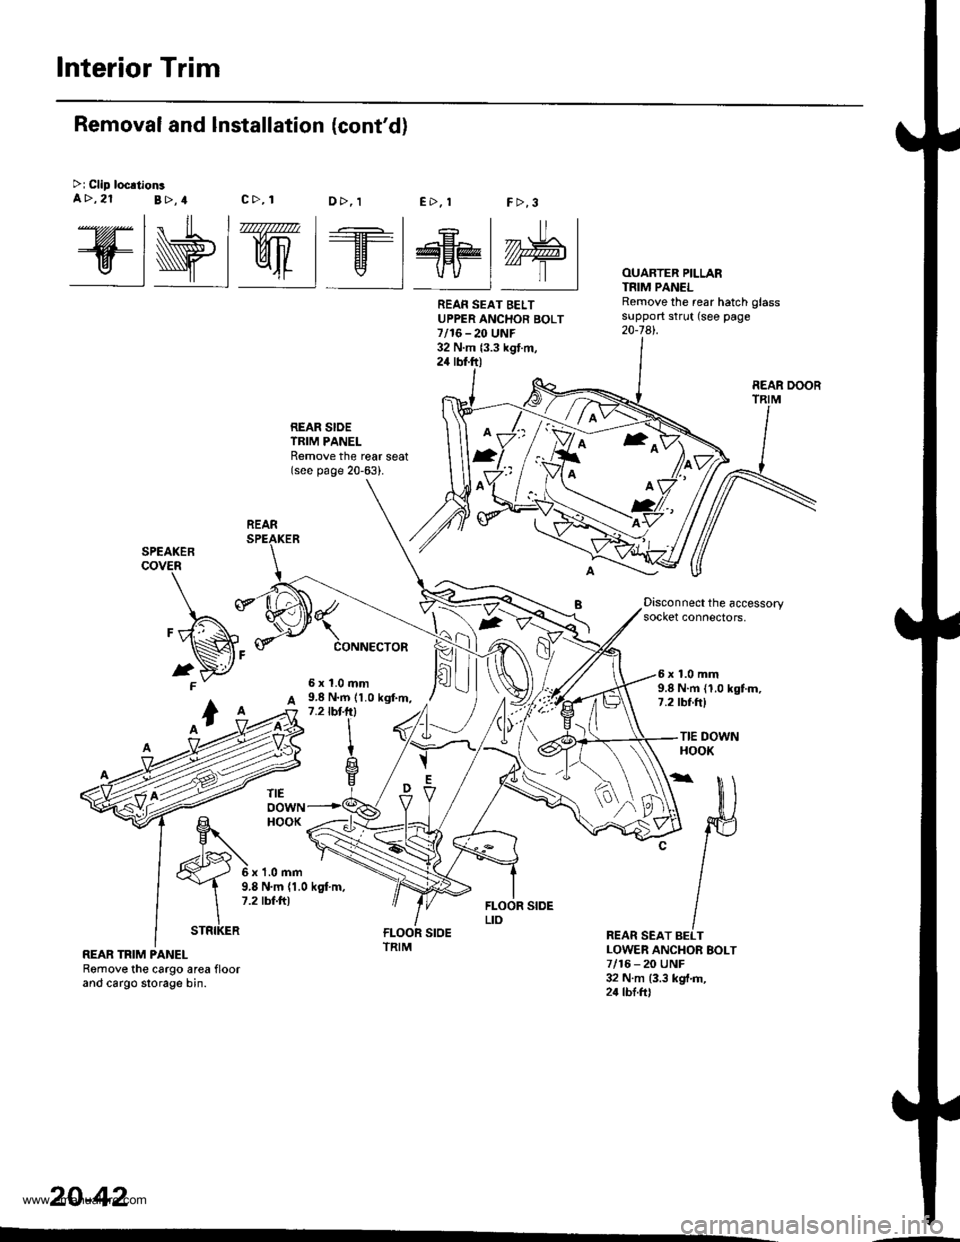 HONDA CR-V 1998 RD1-RD3 / 1.G Service Manual 
Interior Trim
@wt we@M
REAR SIOETRIM PANELRemove the reat seat(see page 20-63).
FCONNECTOR
2
OUARTER PILLARTNIM PANELRemove the rear hatch glasssupport strut (see page20-741.
Removal and Installation